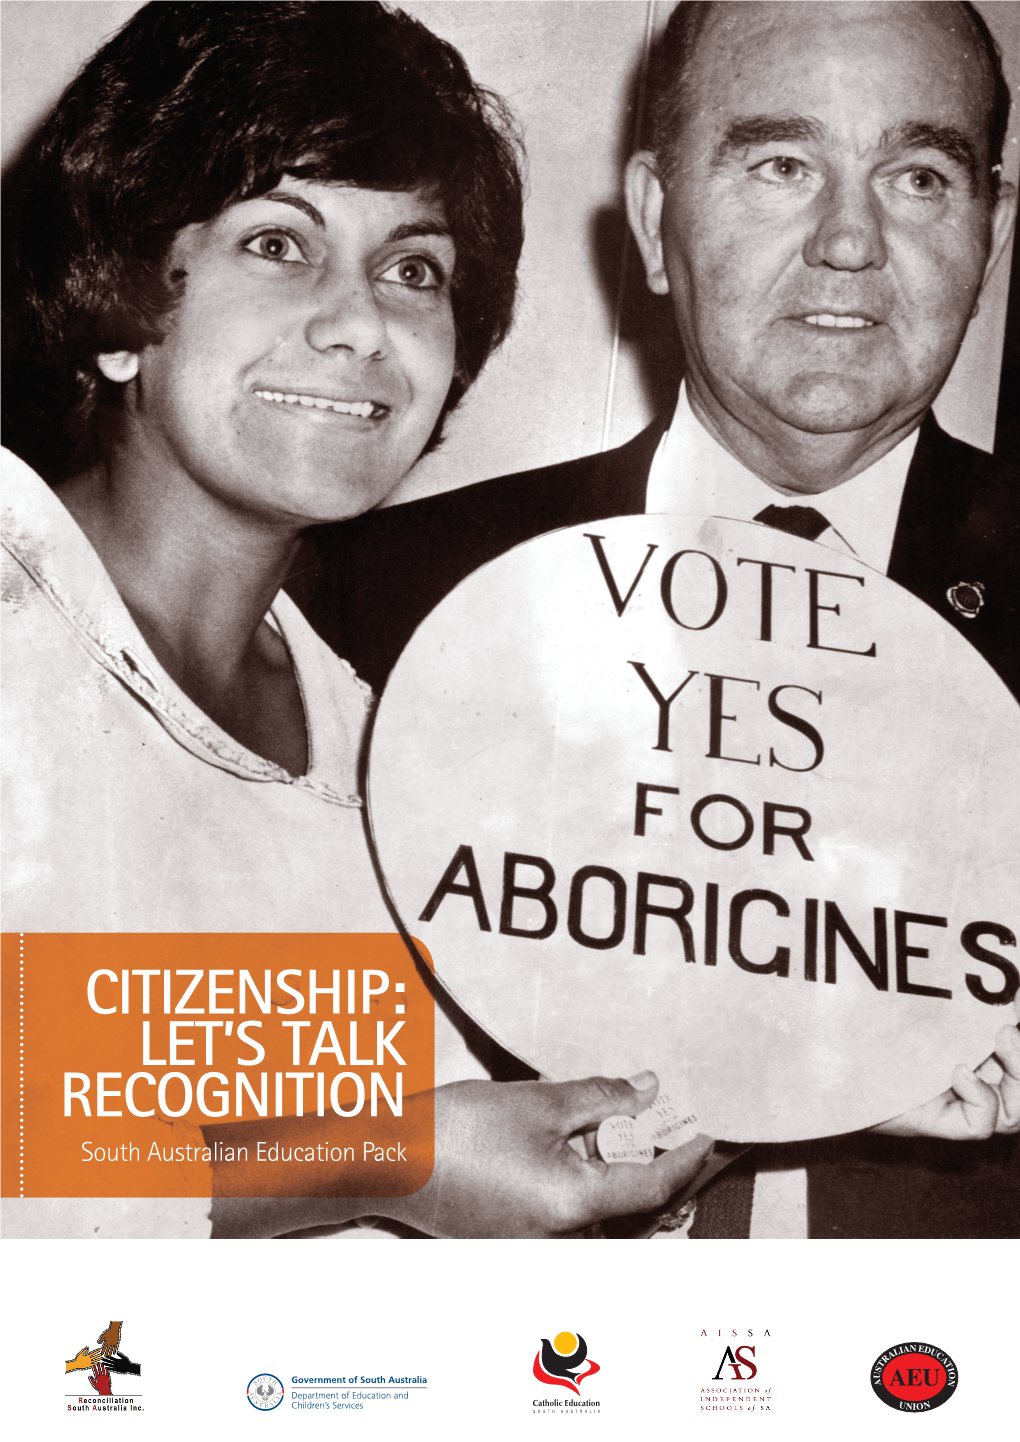 CITIZENSHIP: LET’S TALK RECOGNITION South Australian Education Pack FOREWORD